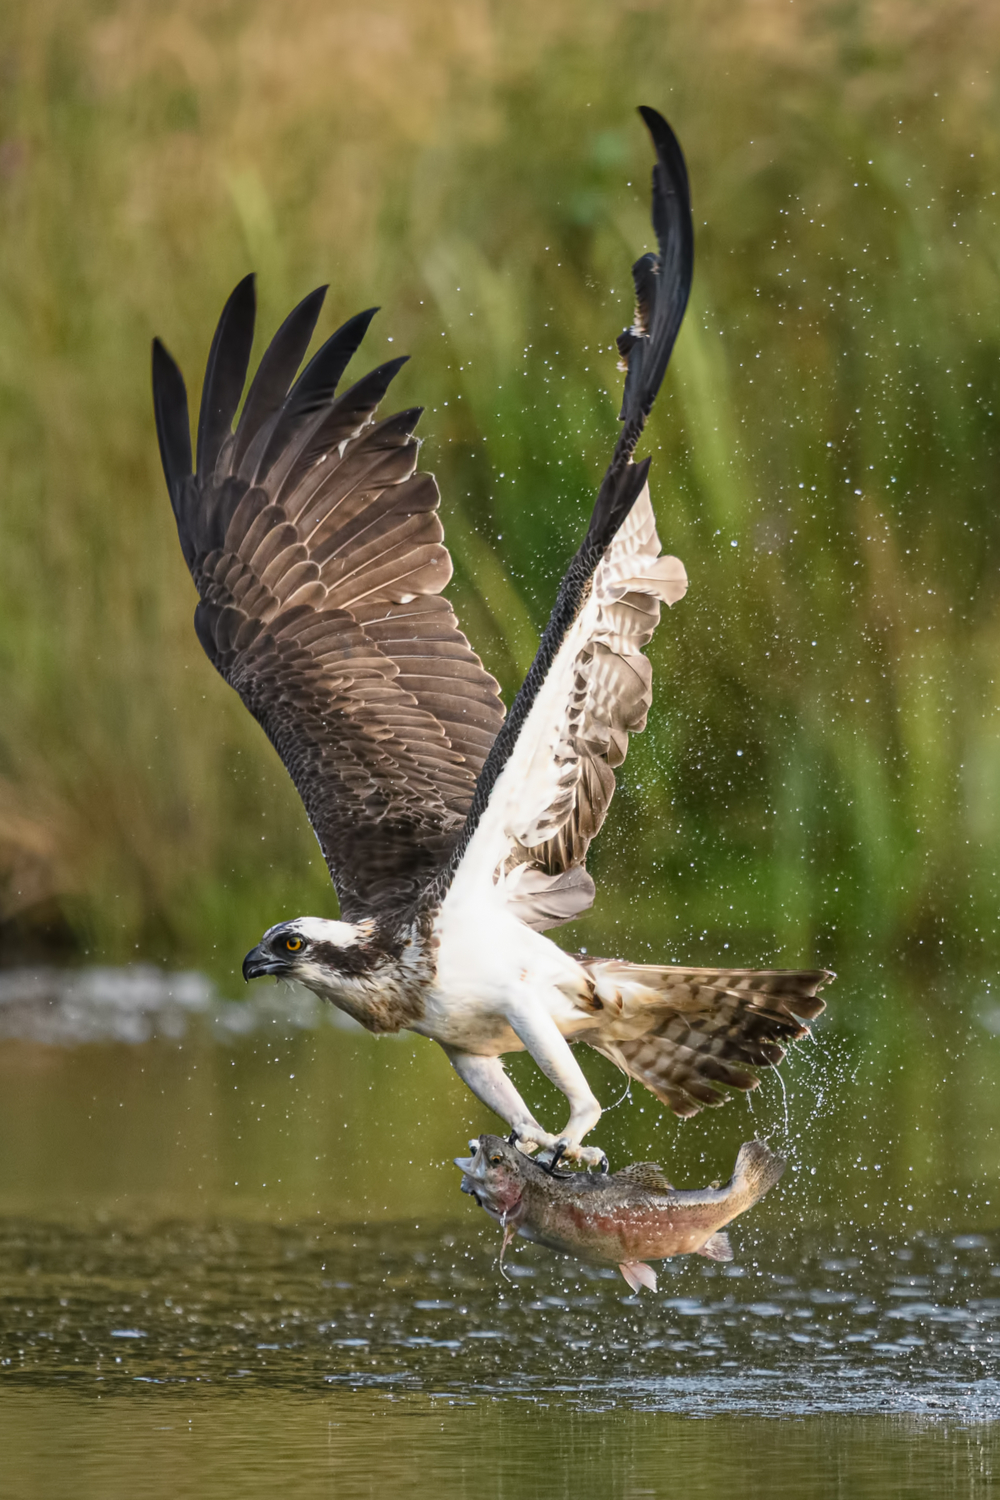 What do ospreys eat in the wild